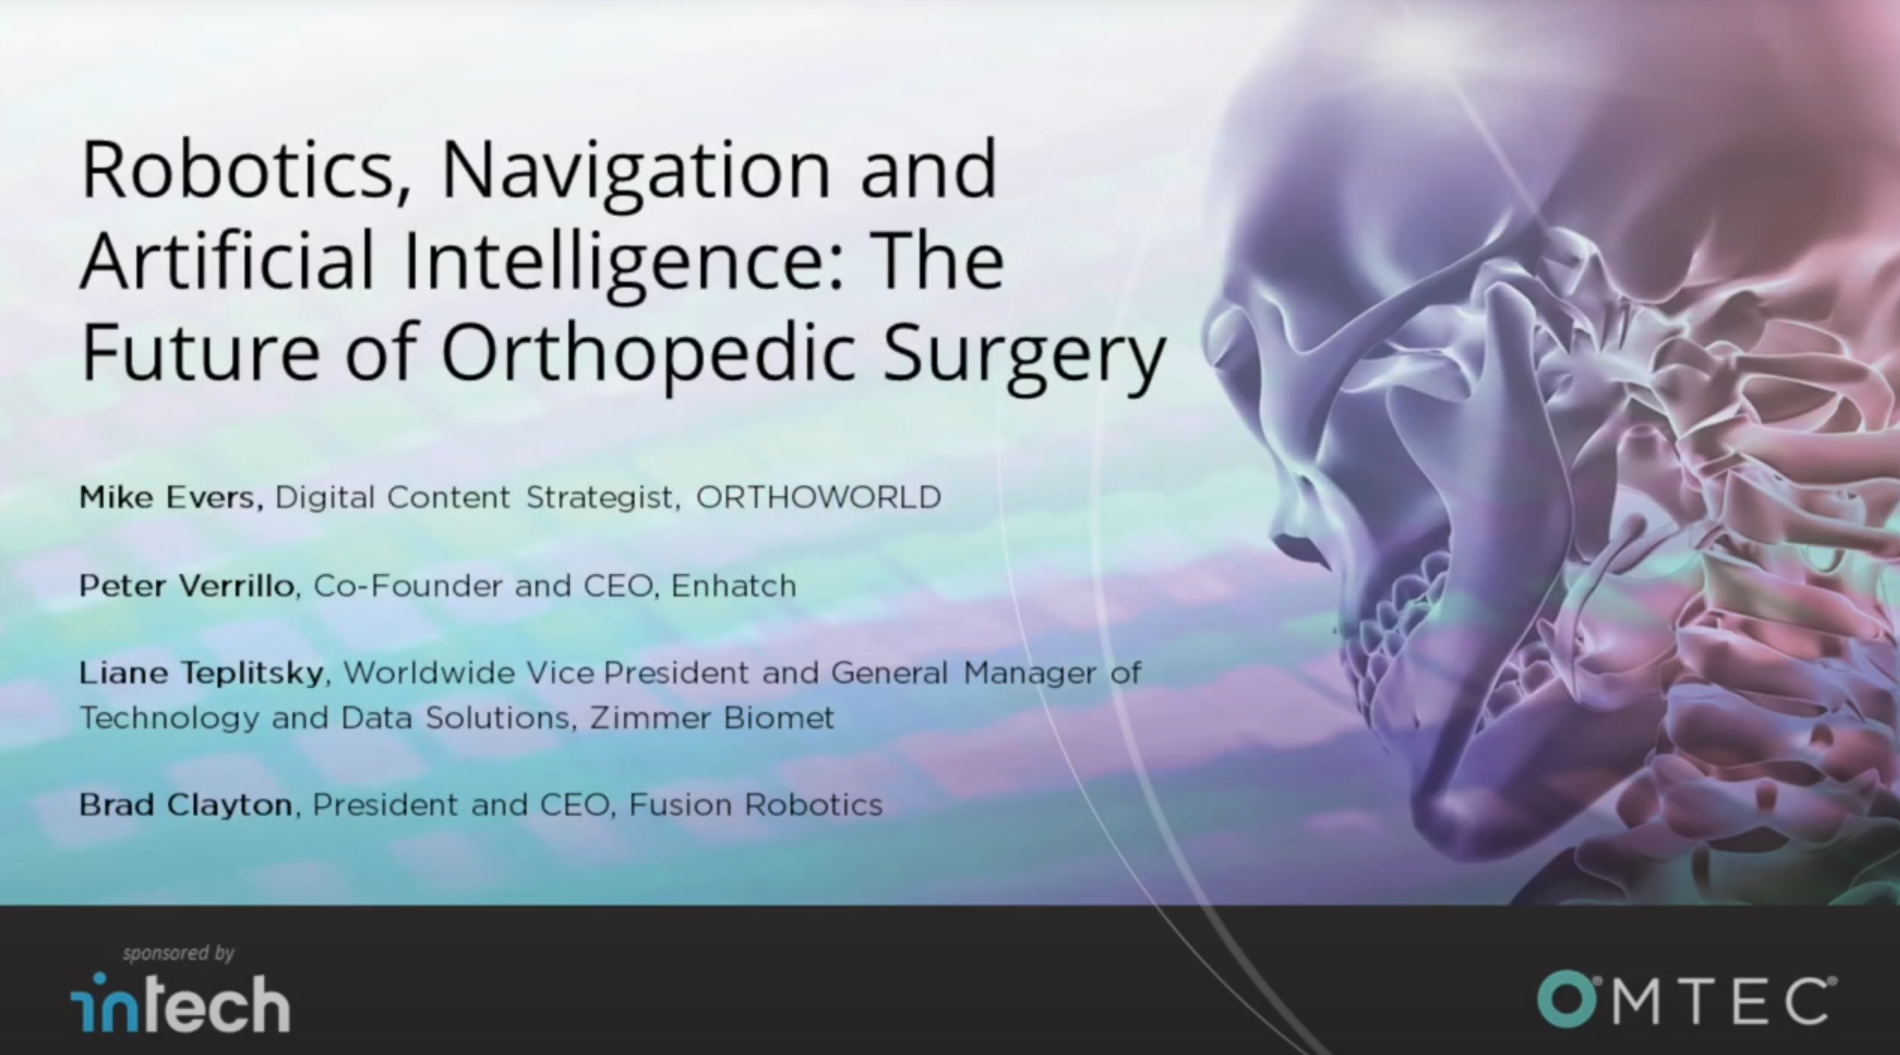 Robotics, Navigation and Artificial Intelligence: The Future of Orthopedic Surgery